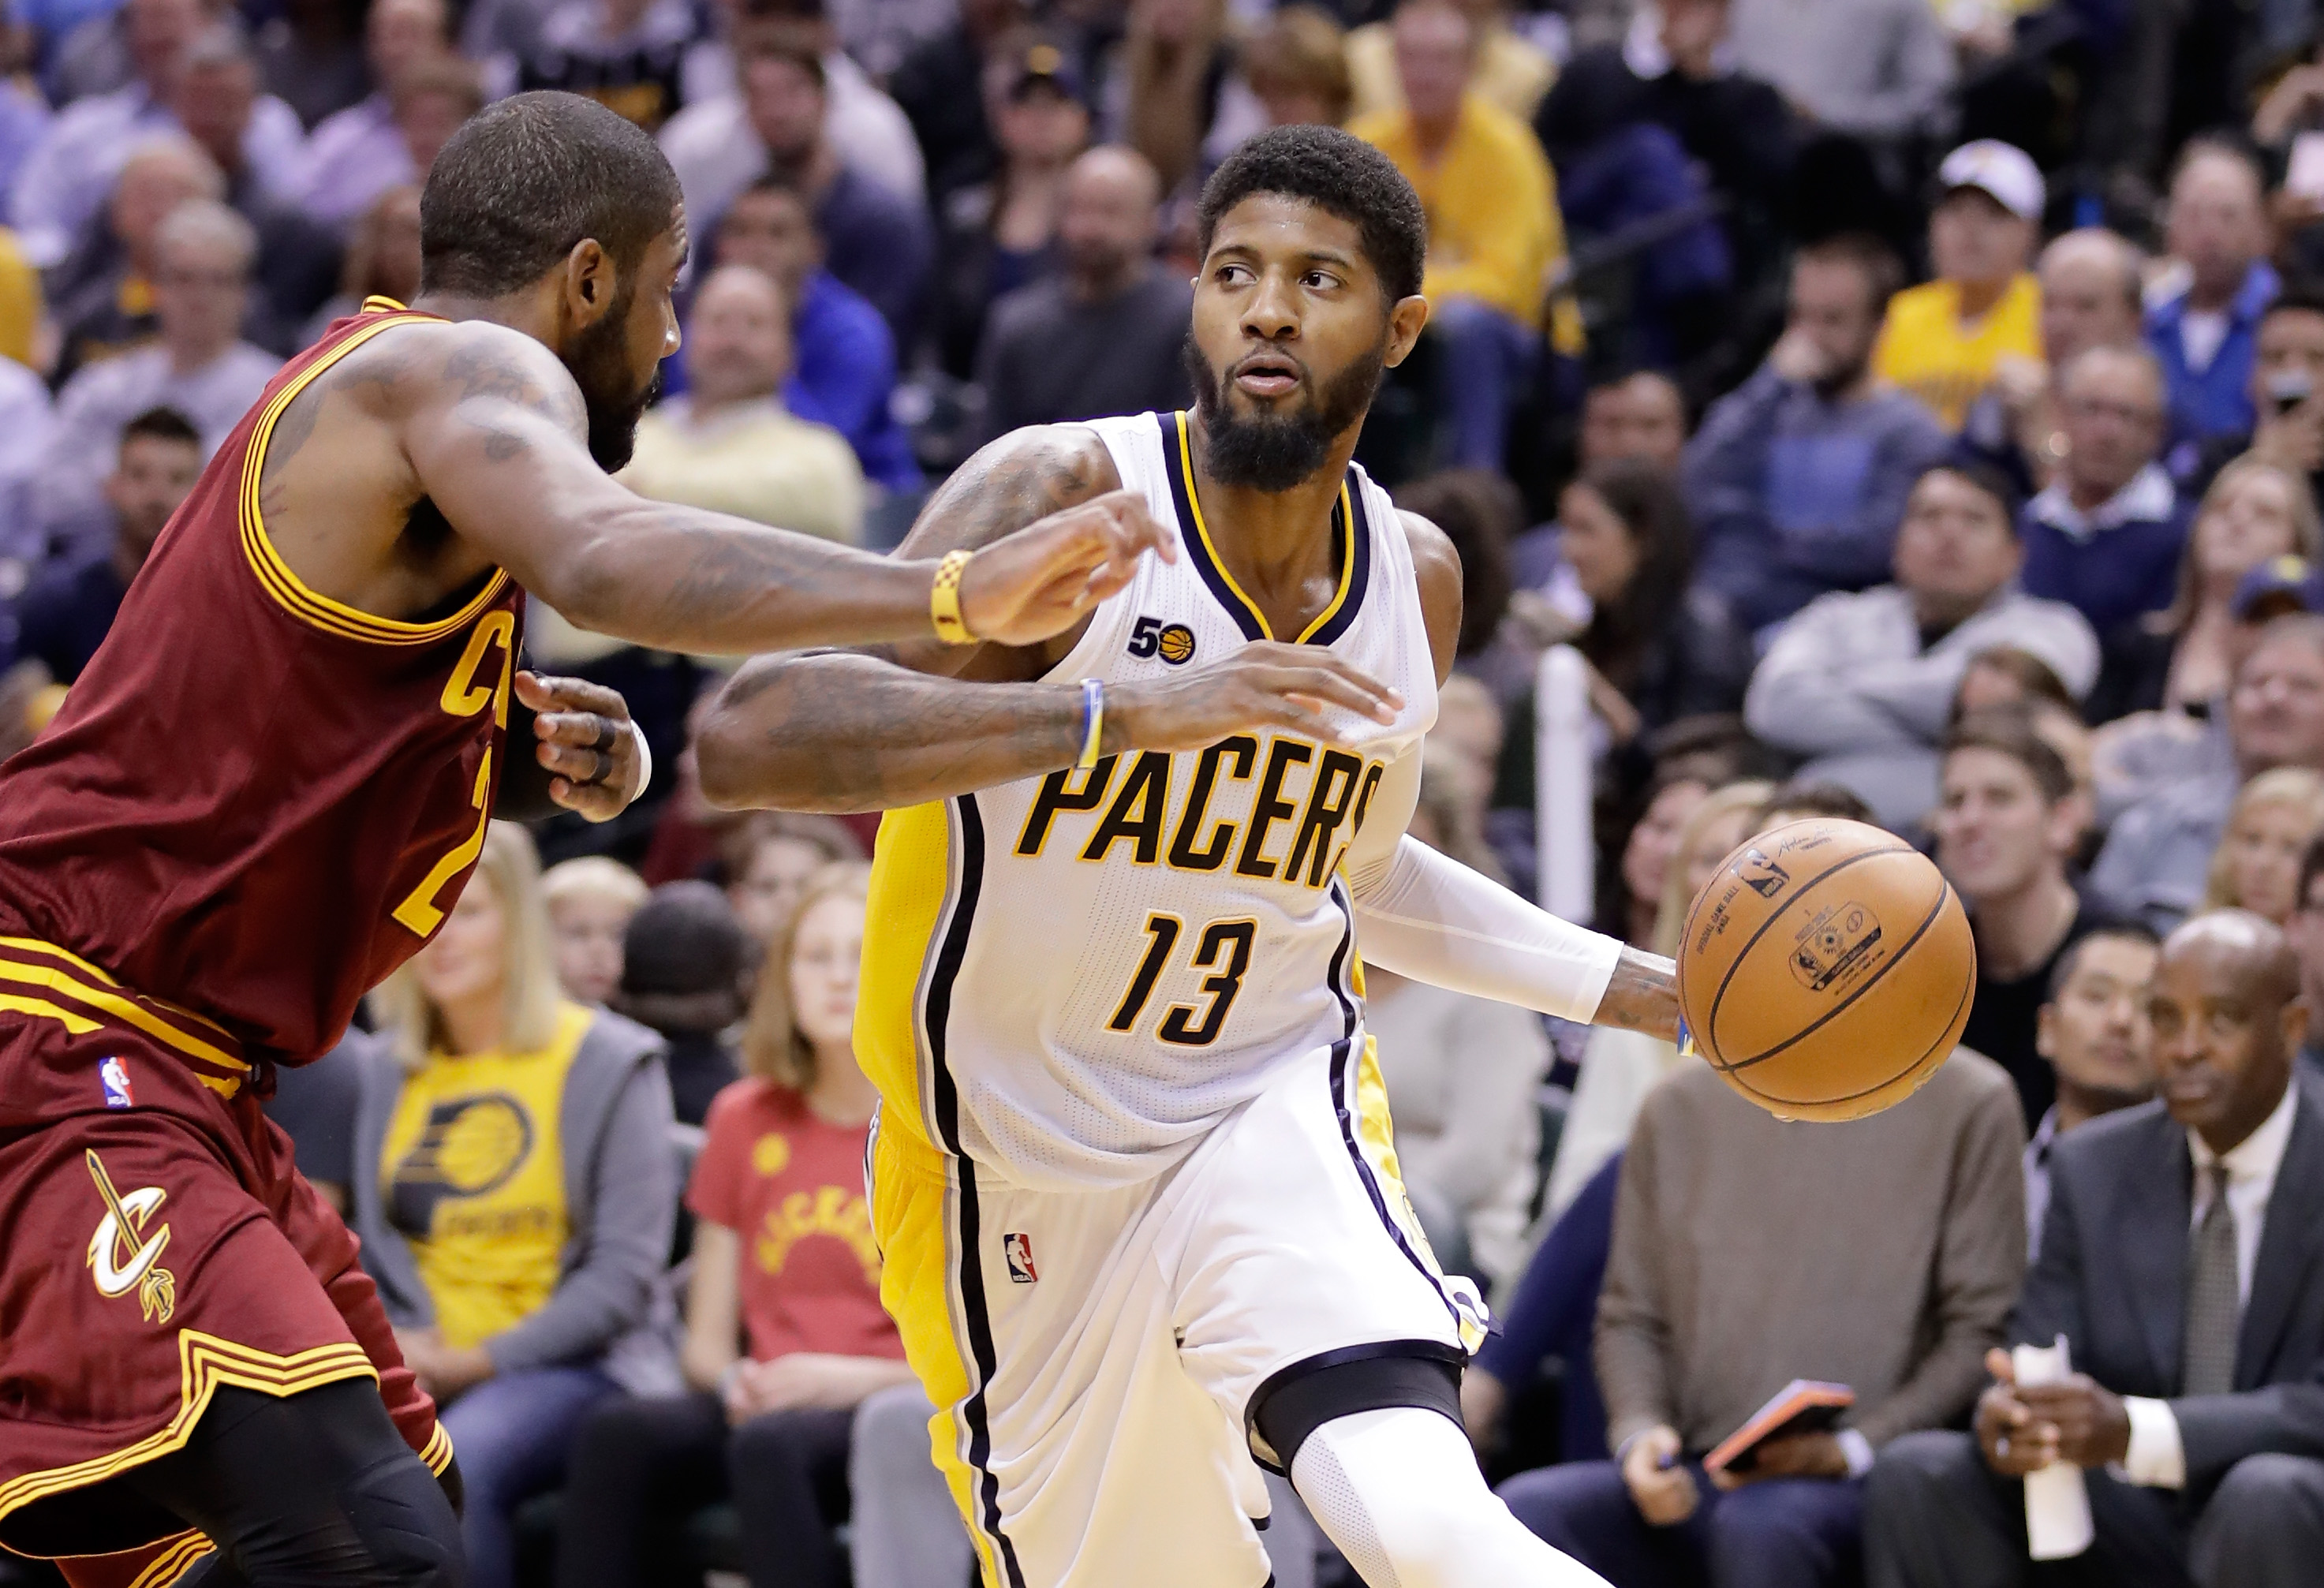 INDIANAPOLIS, IN - NOVEMBER 16: Paul George #13 of the Indiana Pacers dribbles the ball during the game against the Cleveland Cavaliers at Bankers Life Fieldhouse on November 16, 2016 in Indianapolis, Indiana. NOTE TO USER: User expressly acknowledges and agrees that, by downloading and or using this photograph, User is consenting to the terms and conditions of the Getty Images License Agreement   Andy Lyons/Getty Images/AFP